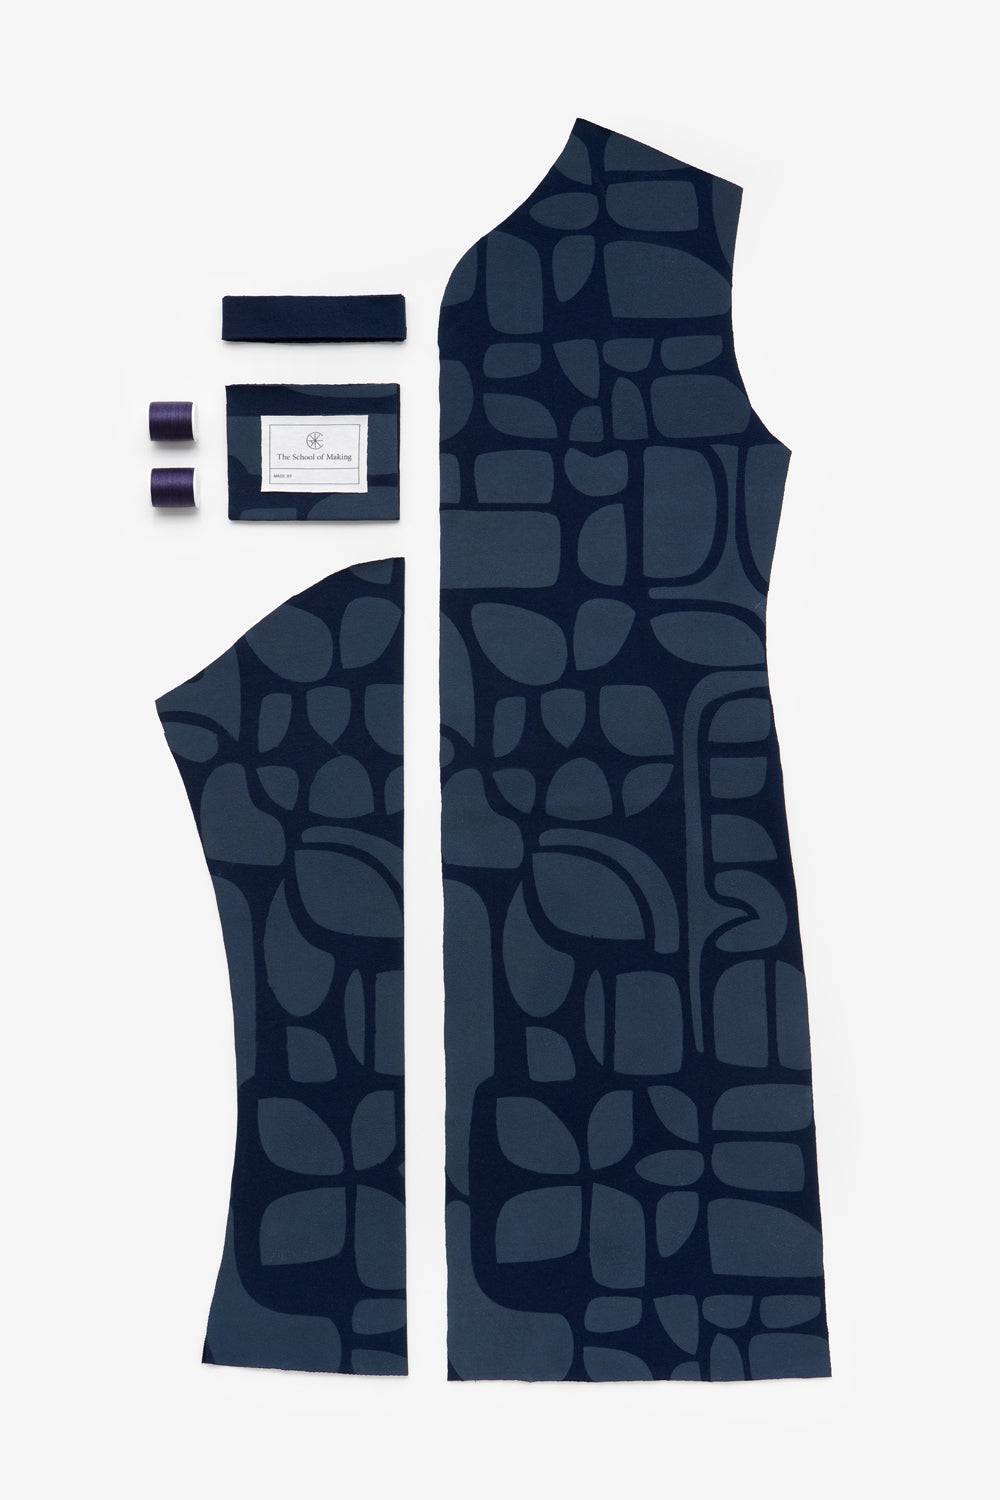 The School of Making DIY kit contents of the Classic Coat in navy with Tony design. Features pre-cut fabric and notions.